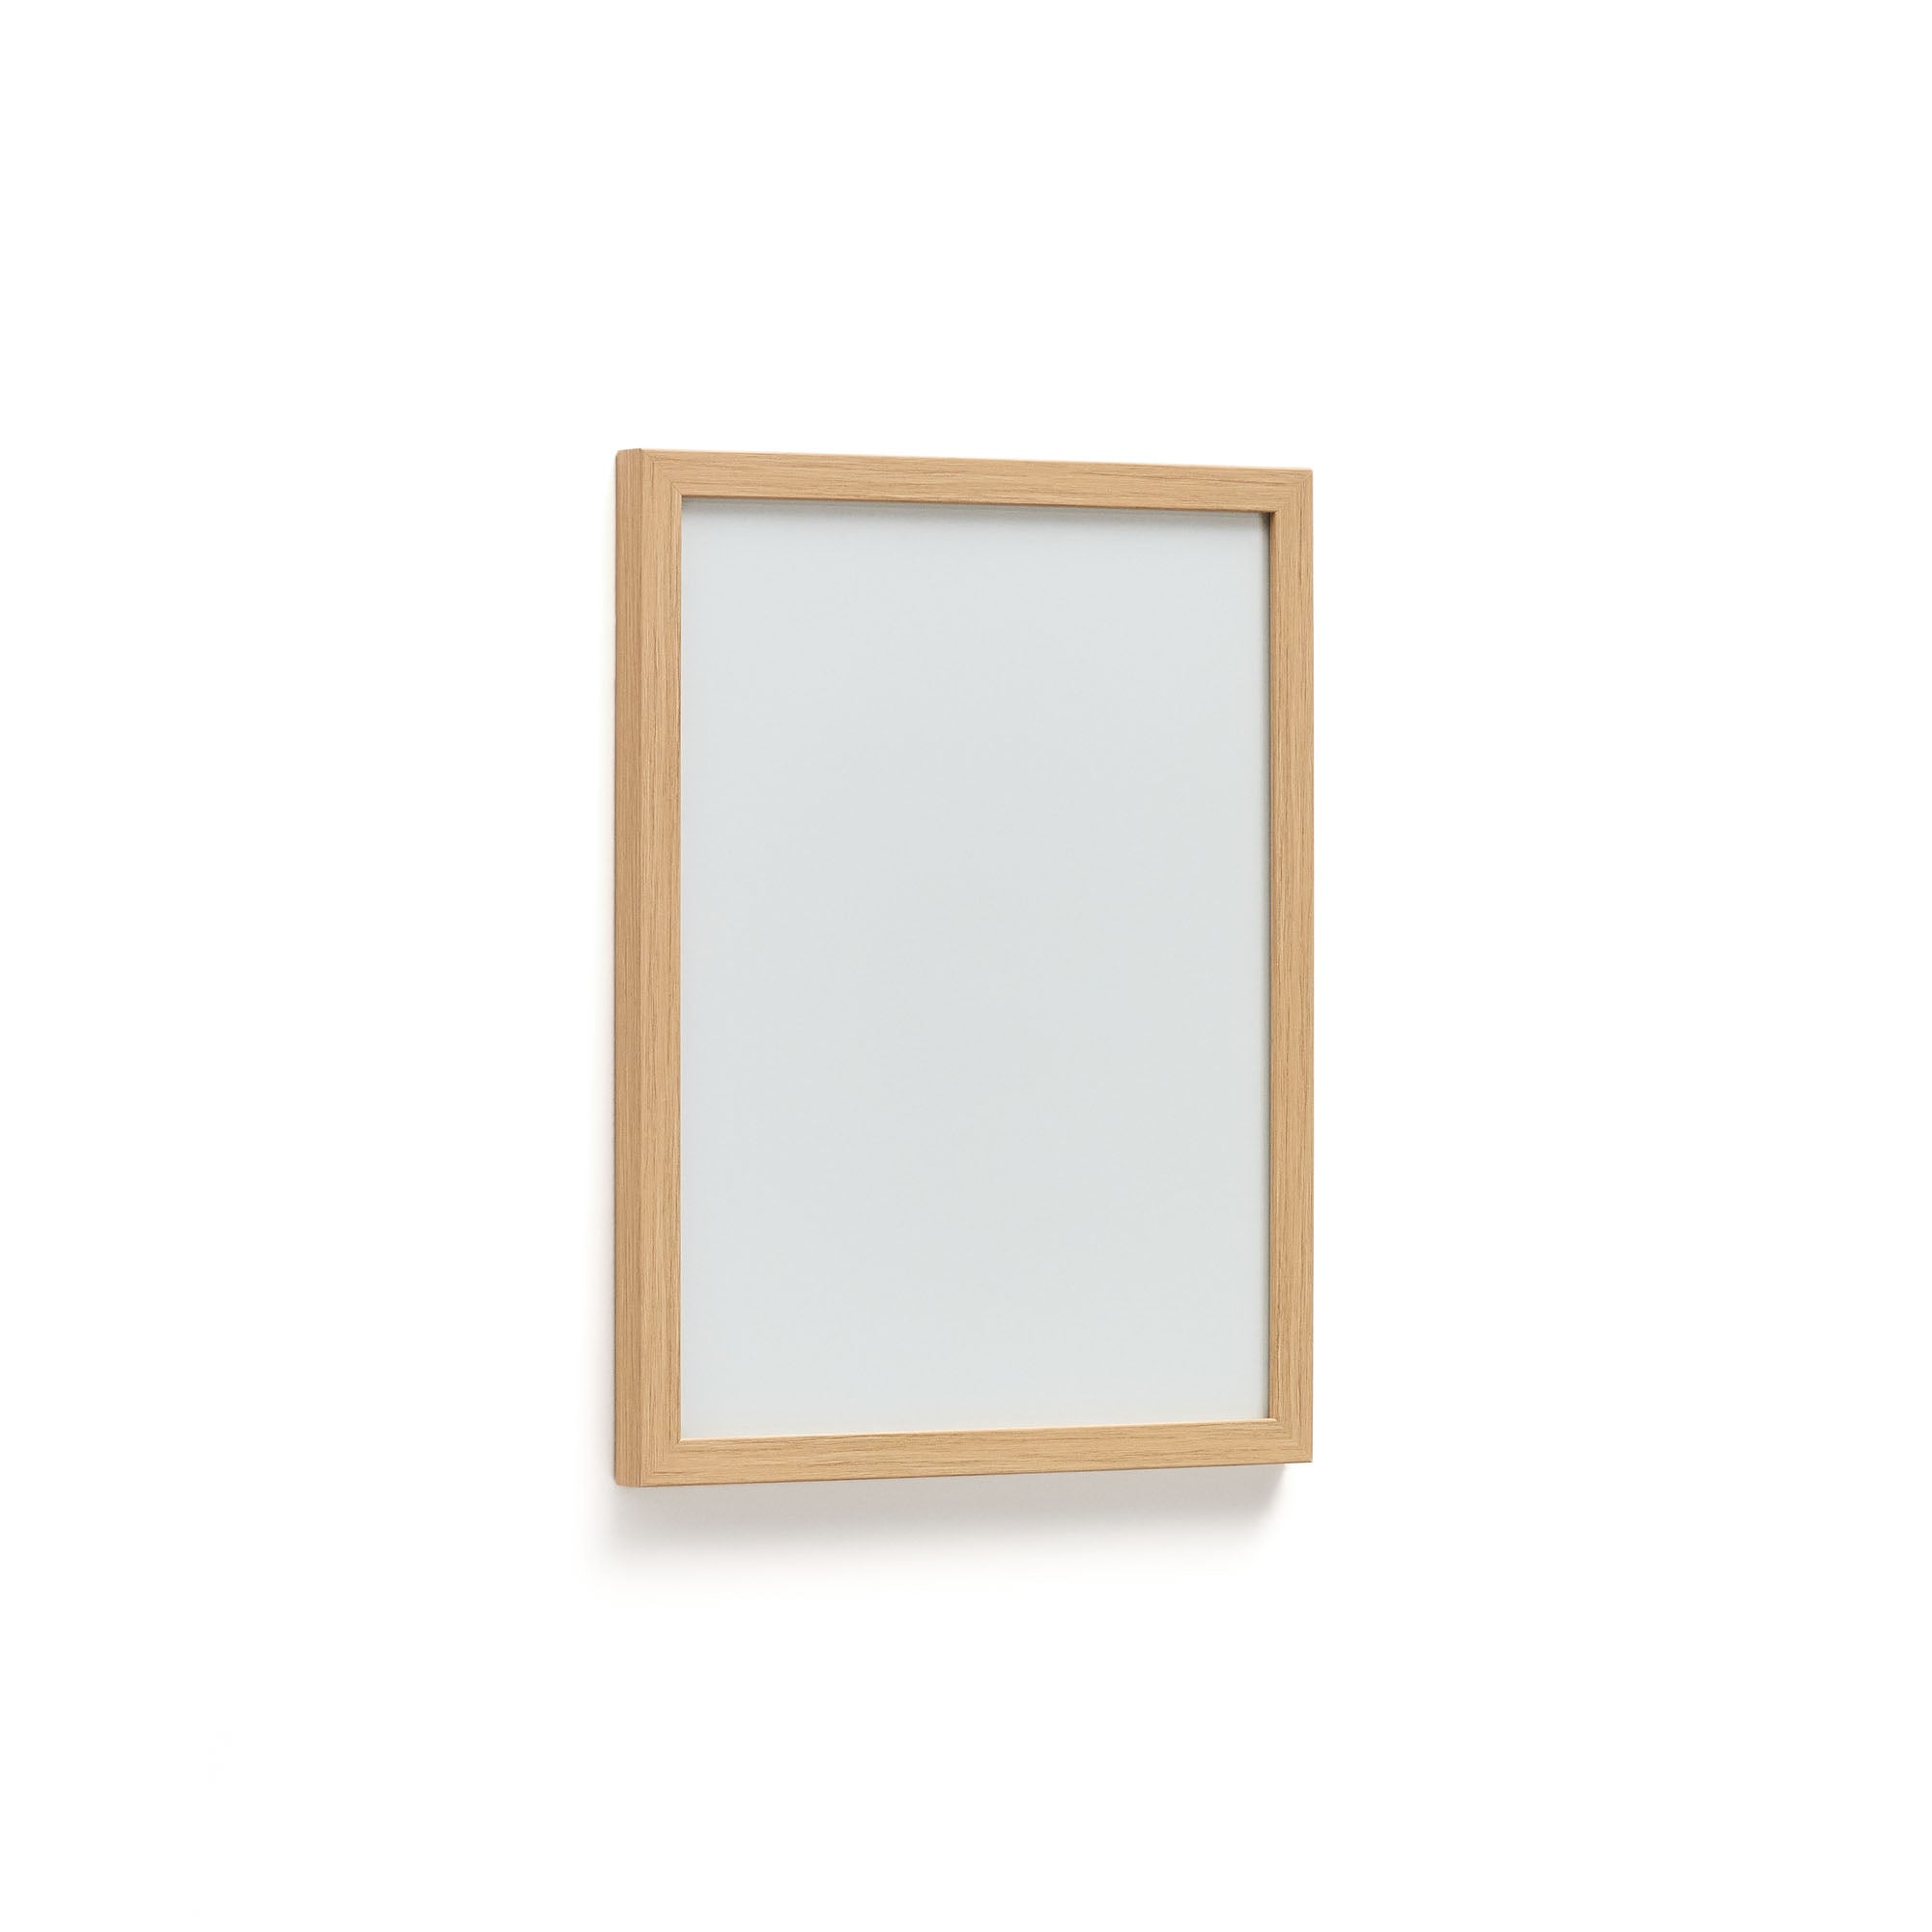 Neale wood photo frame with natural finish 29.8 x 39.8 cm